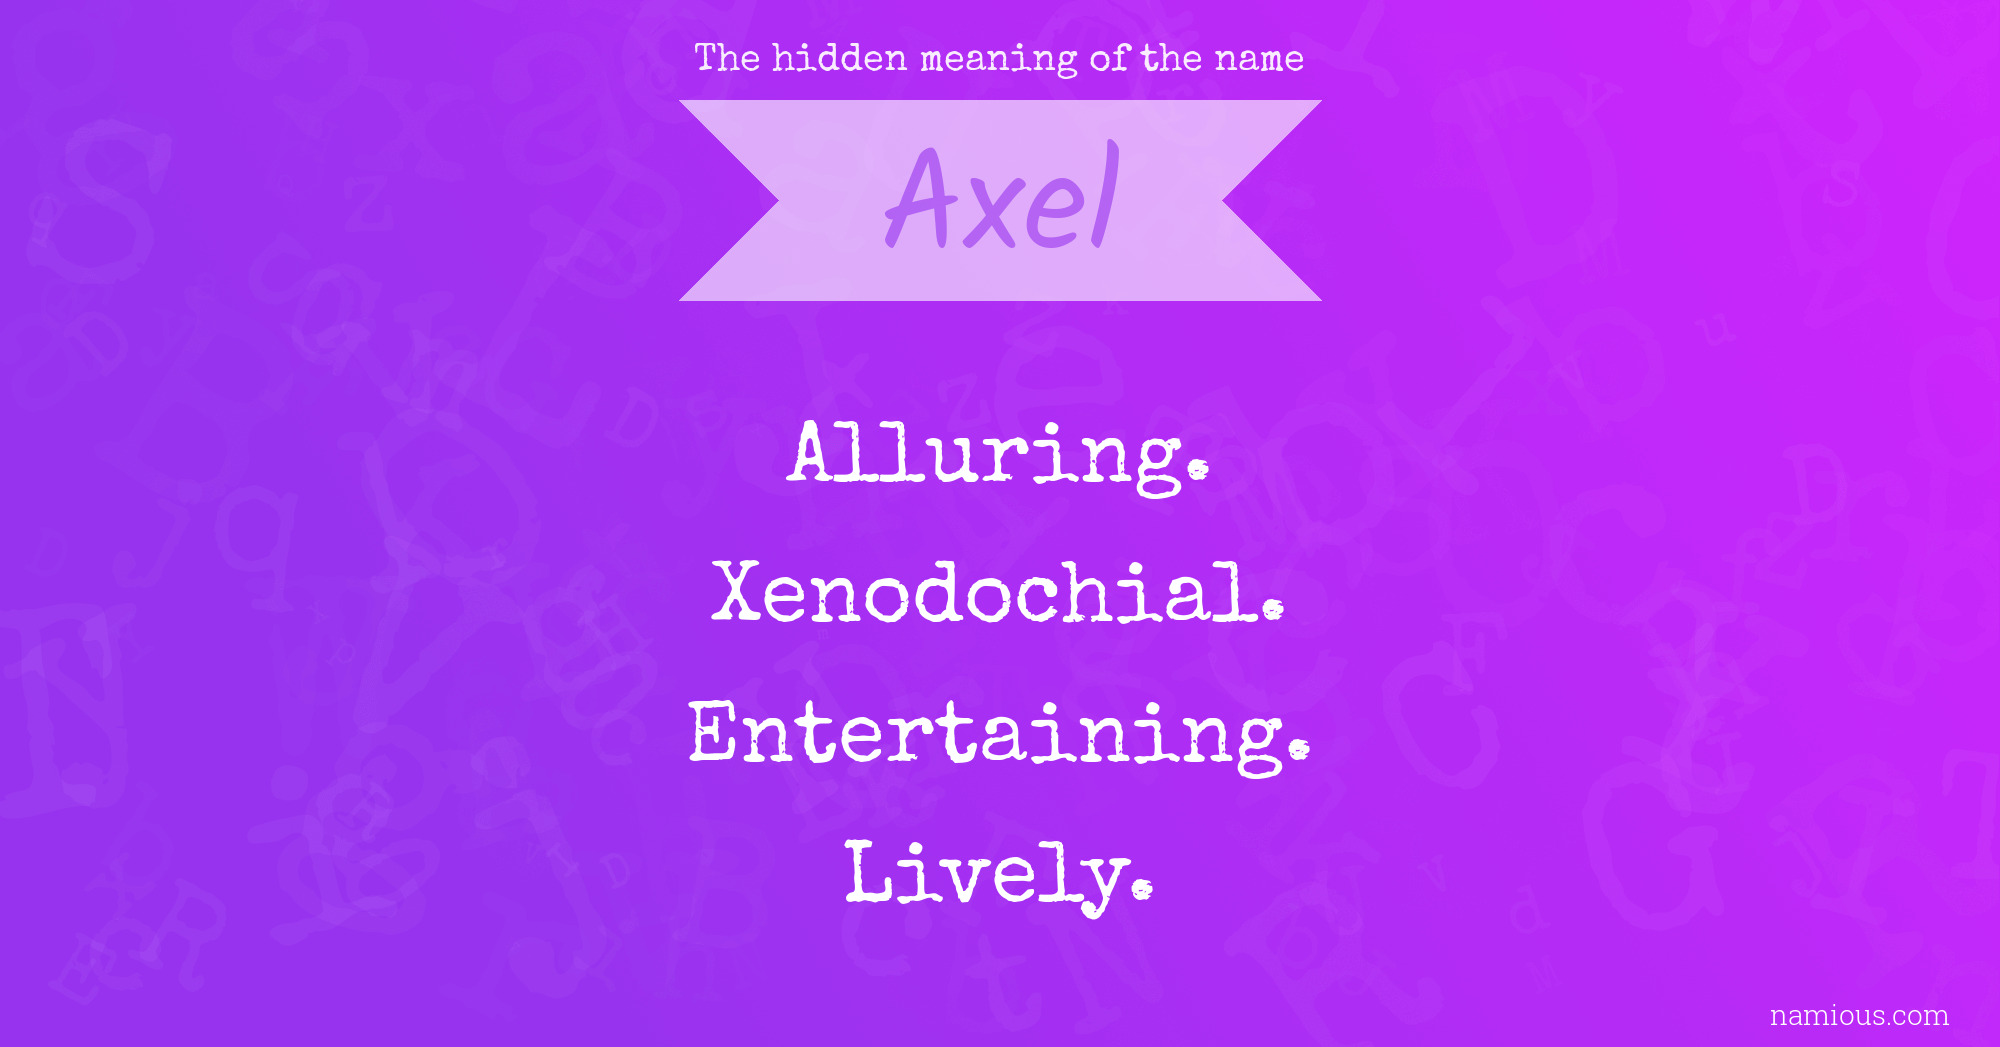 The hidden meaning of the name Axel